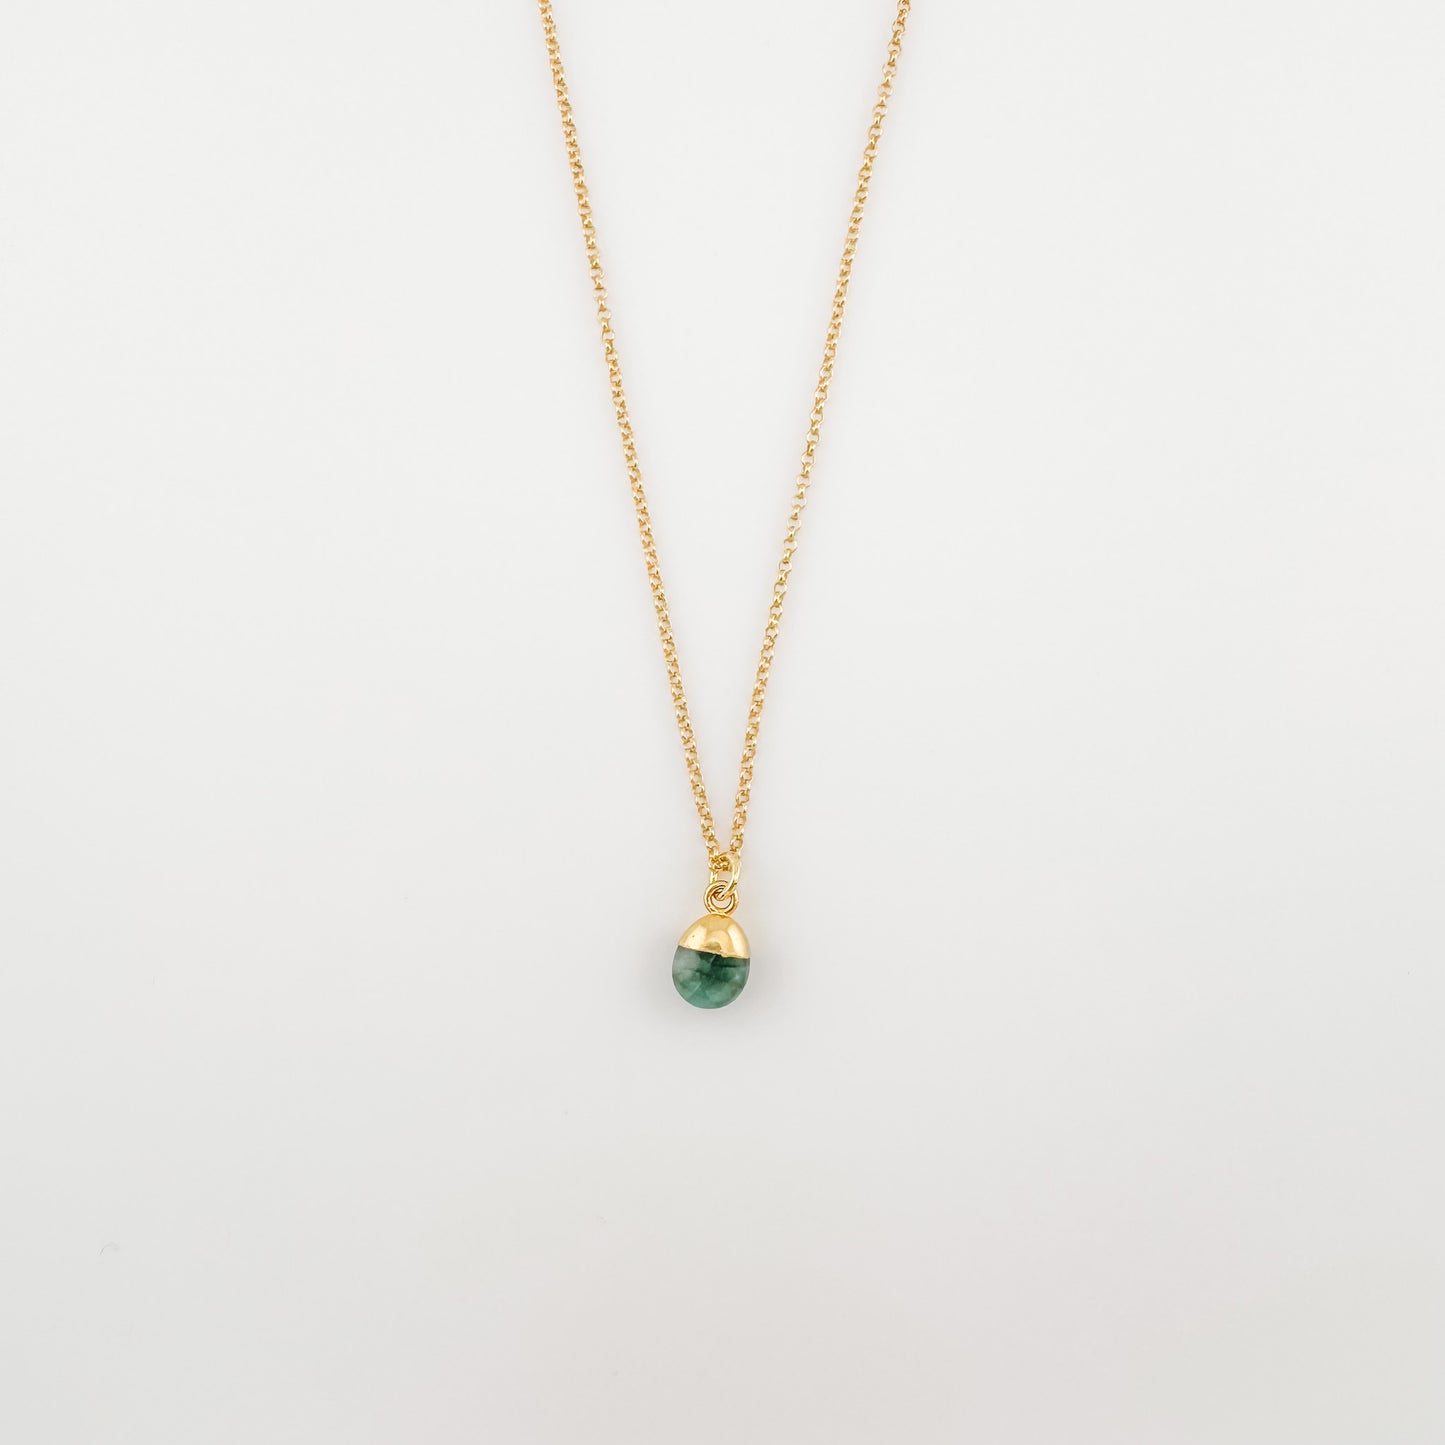 Emerald tumbled necklace